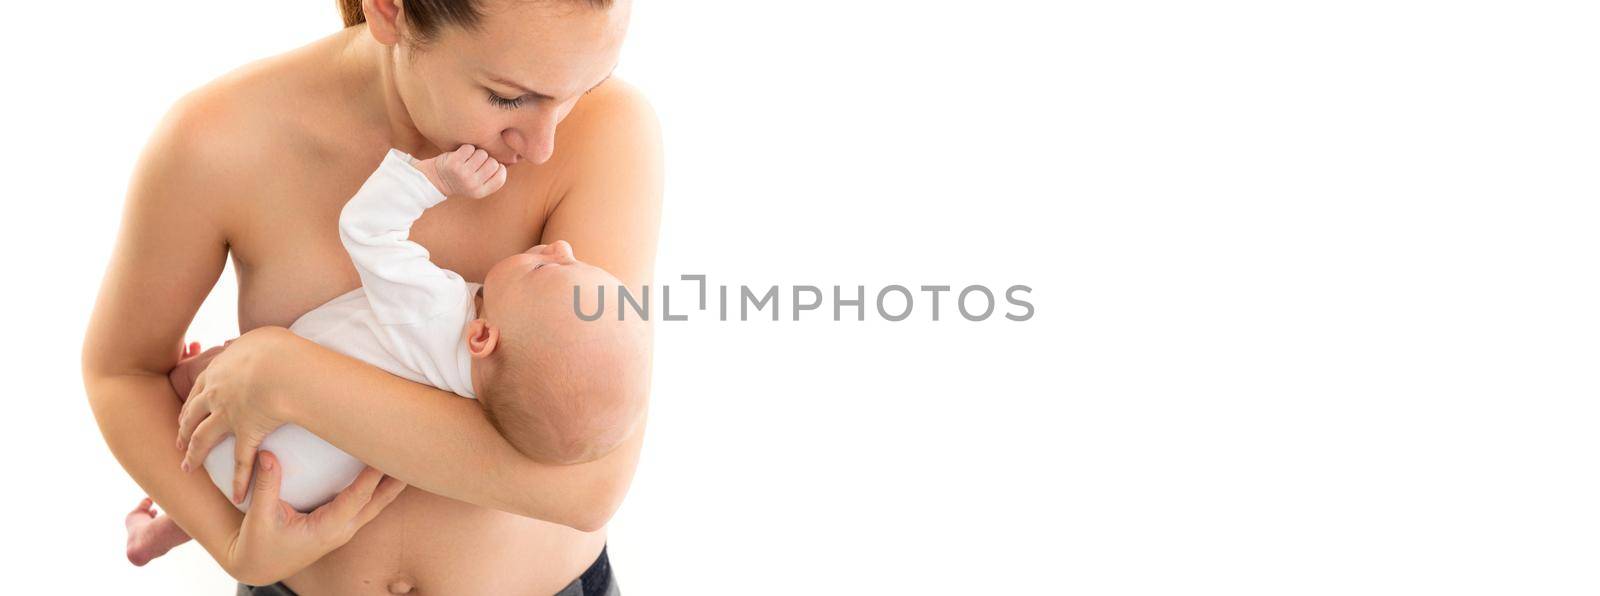 caring mother holding a newborn baby in her arms on a white background, the concept of breastfeeding with natural mother's milk.